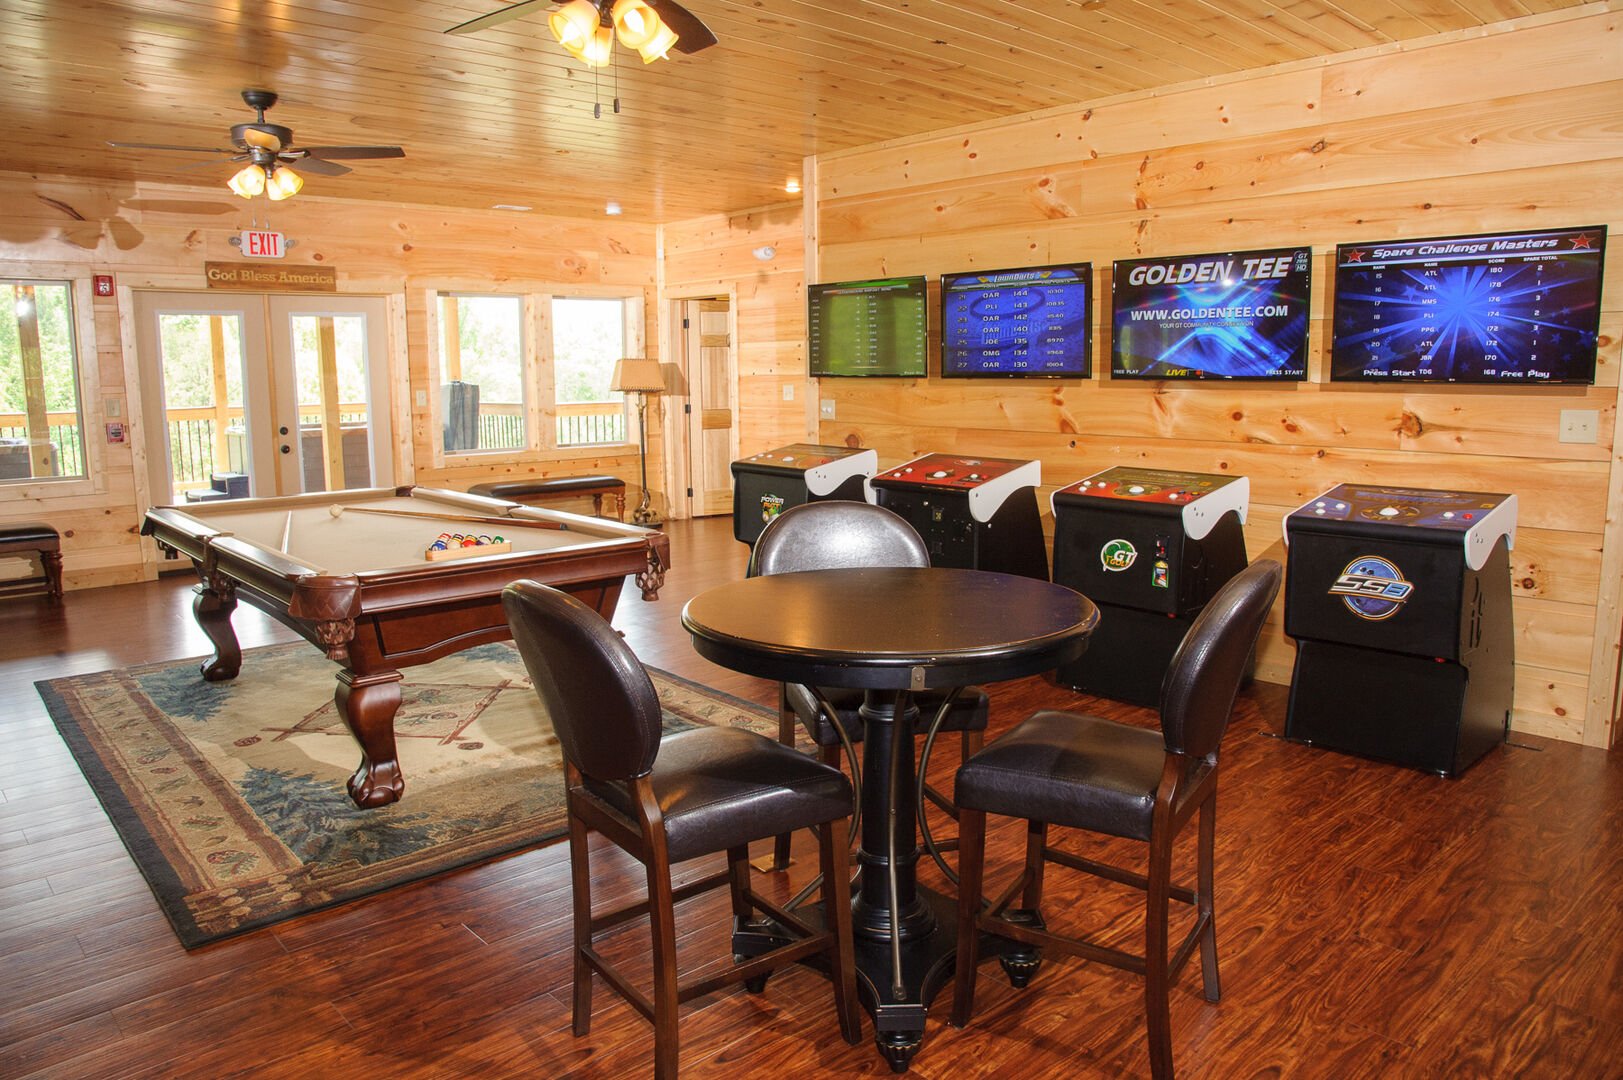 Game Room with Table, Chairs, Arcade Games, and Pool Table.